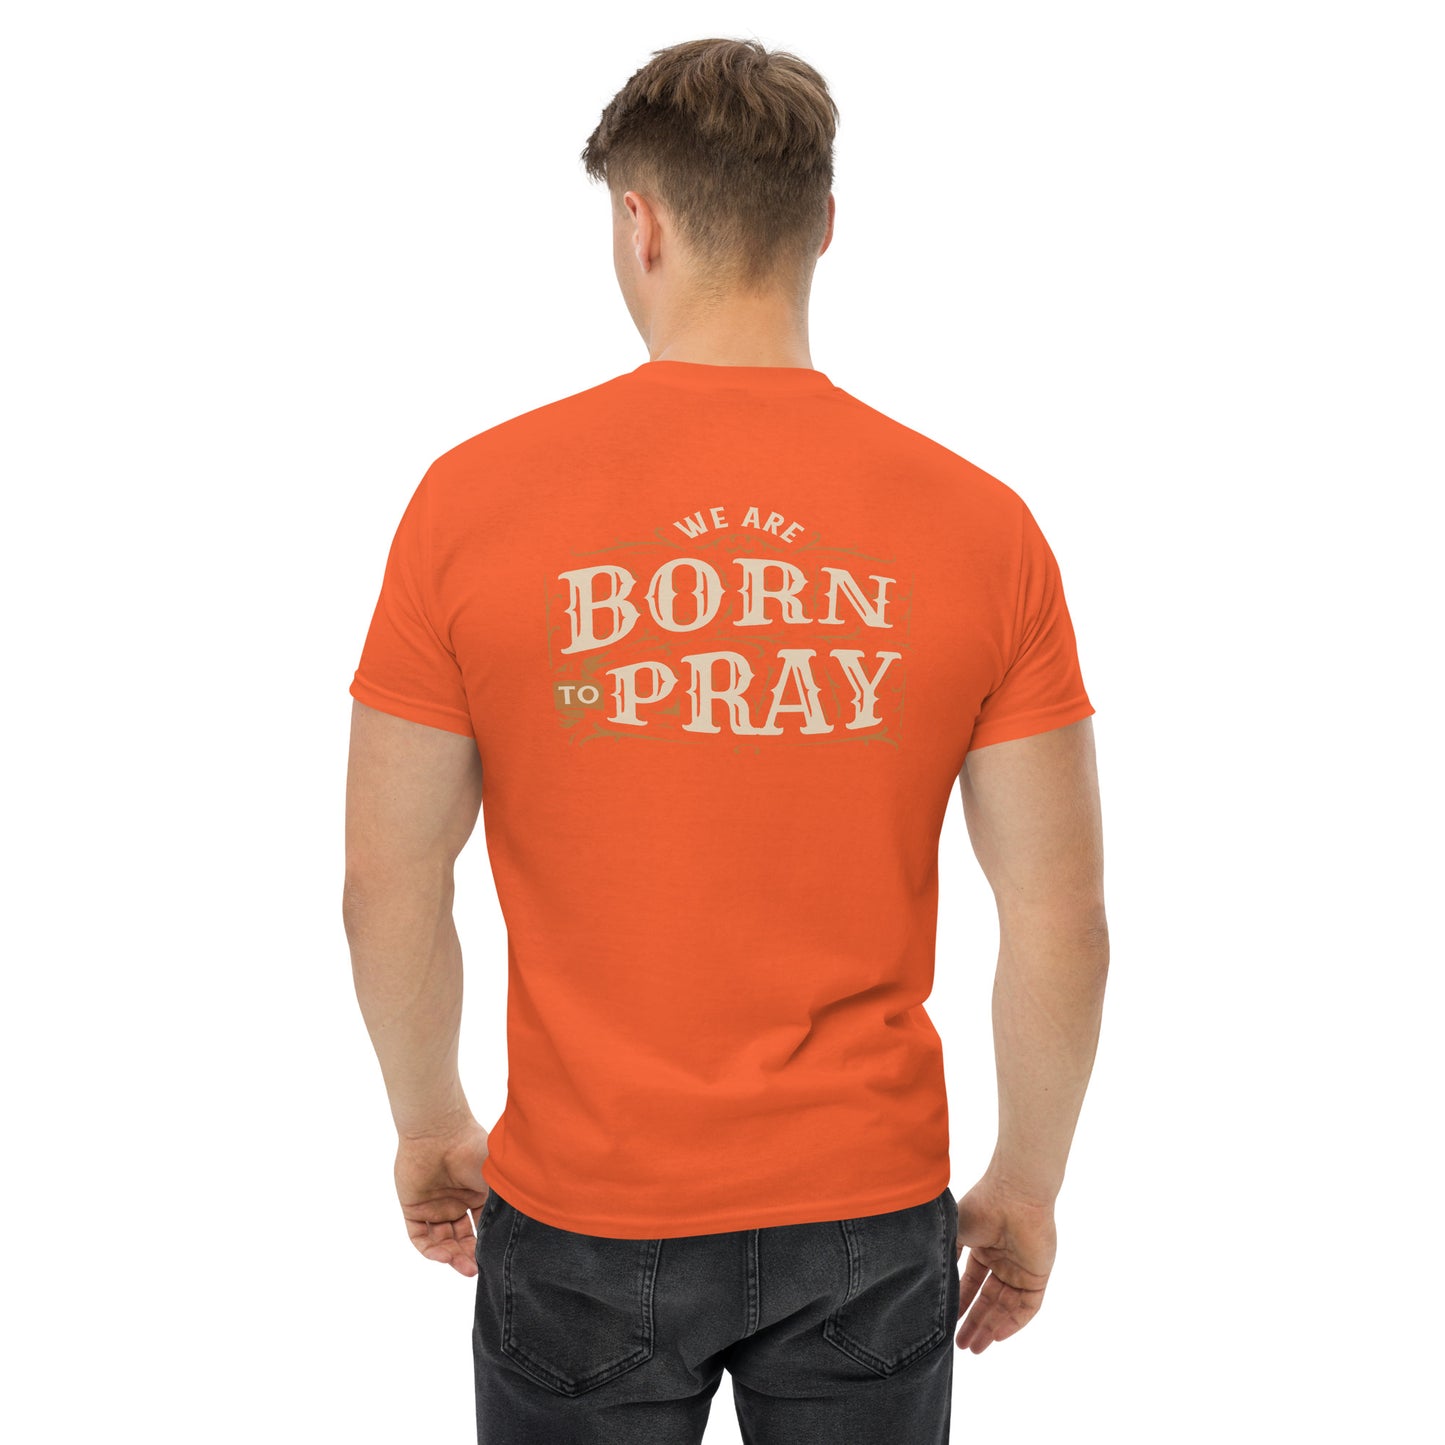 We Are Born to Pray (Back)